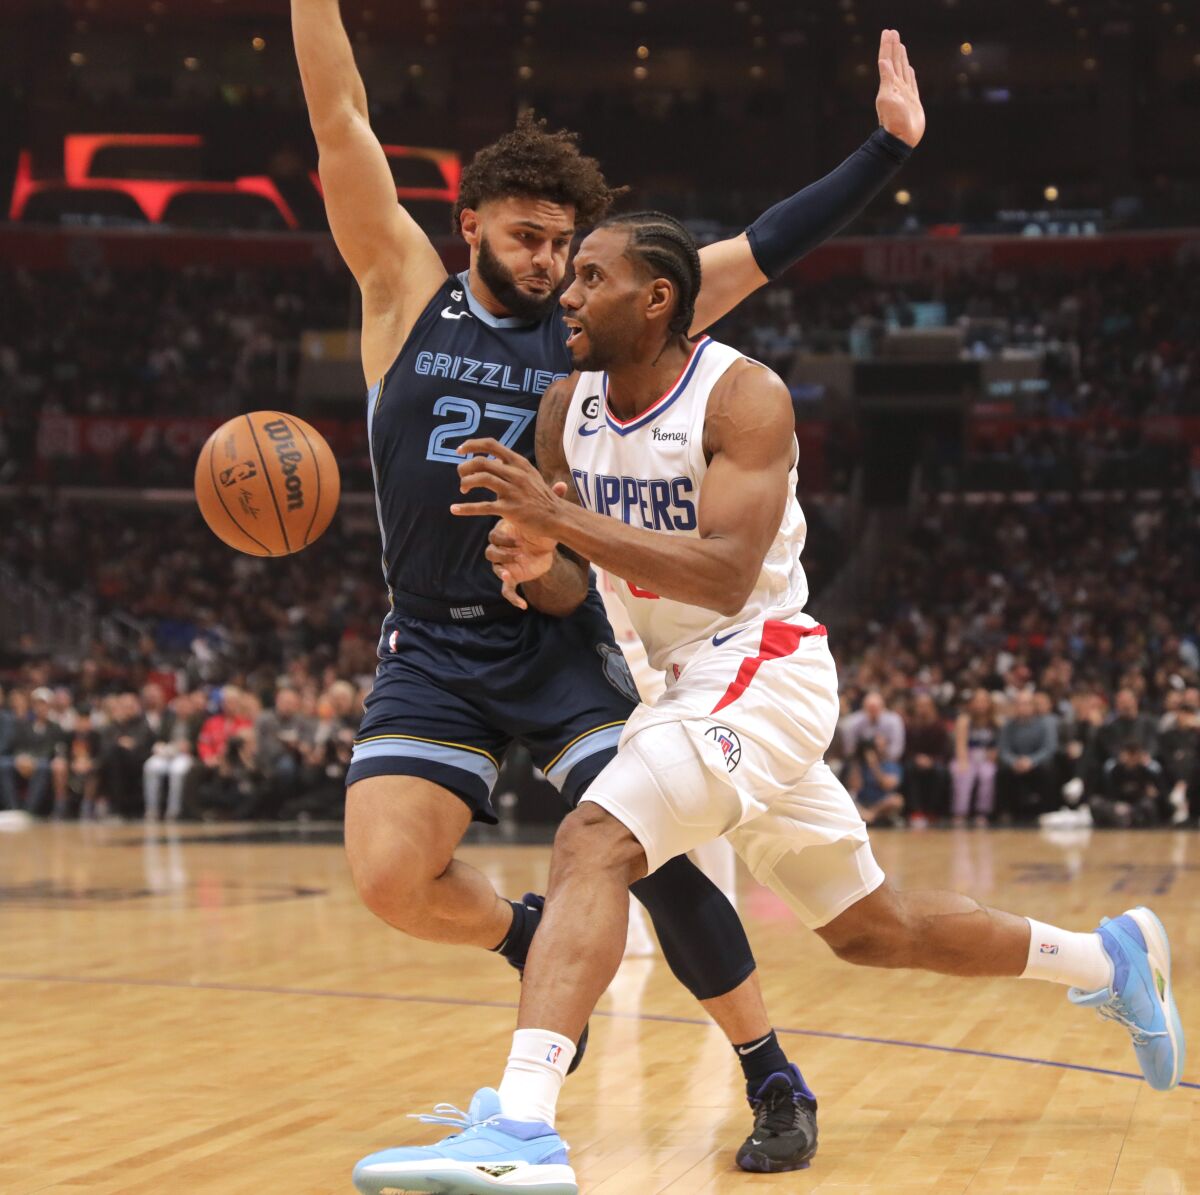 Clippers star Kawhi Leonard is fouled by the Grizzlies' David Roddy during the second quarter Sunday.